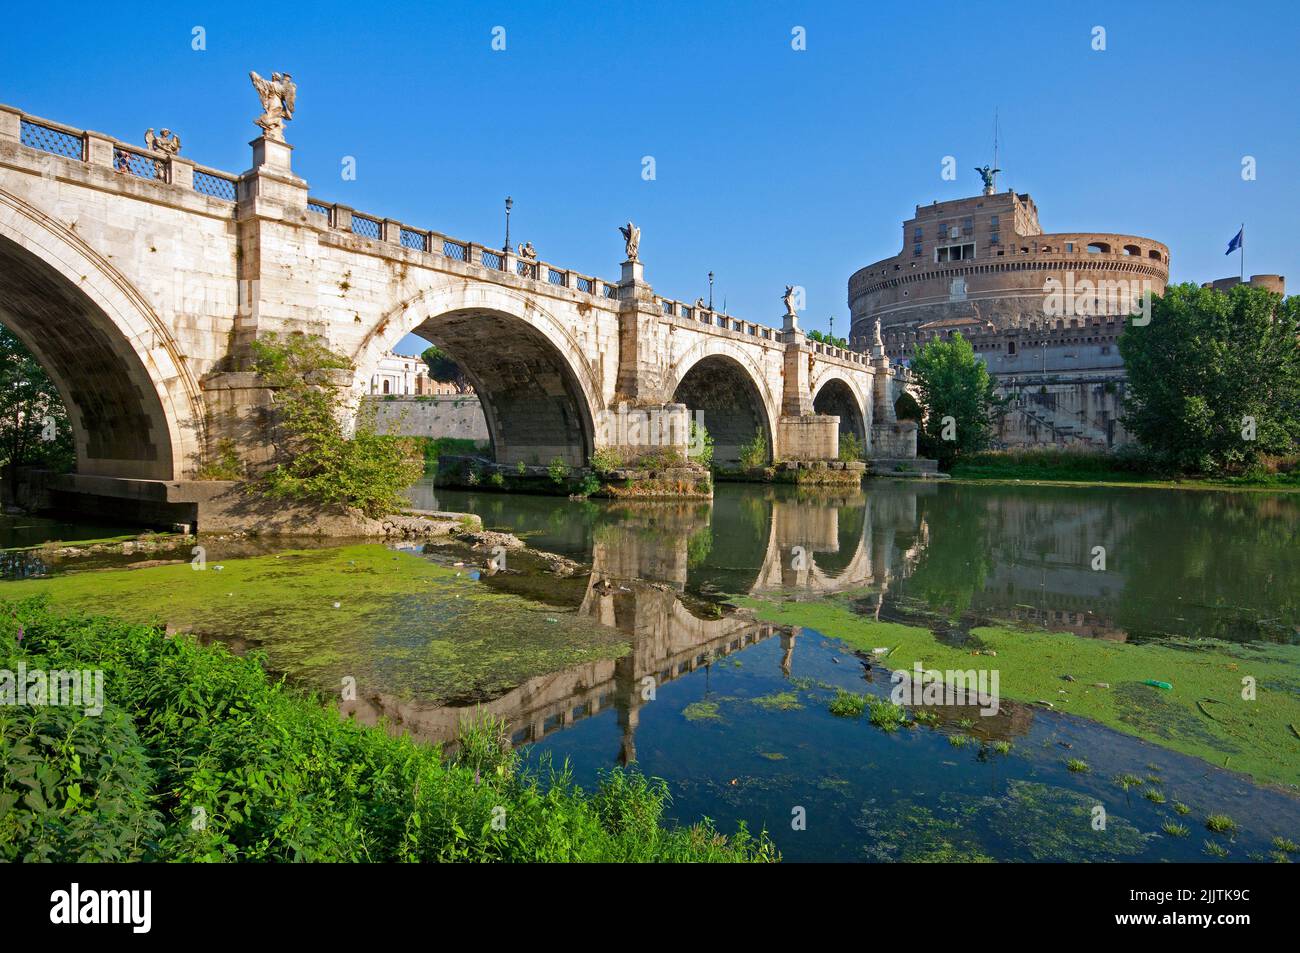 Sant'Angelo Bridge and Mausoleum of Hadrian with Tiber river during drought (July 2022), Rome, Italy Stock Photo